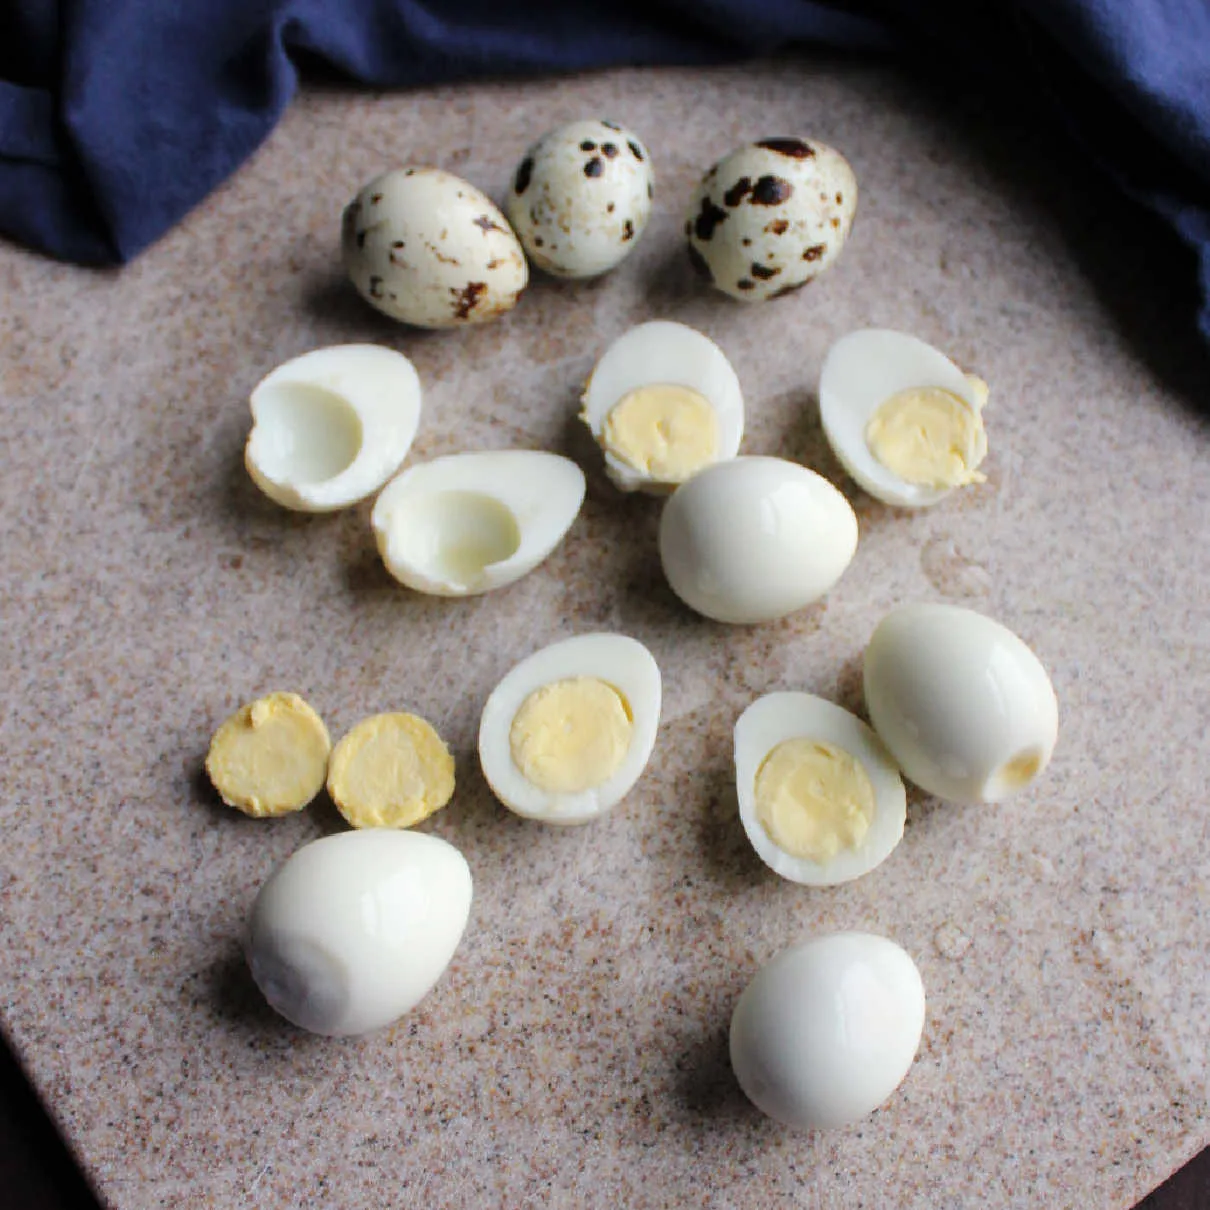 Small boiled quail eggs cut in half with some yolks removed.